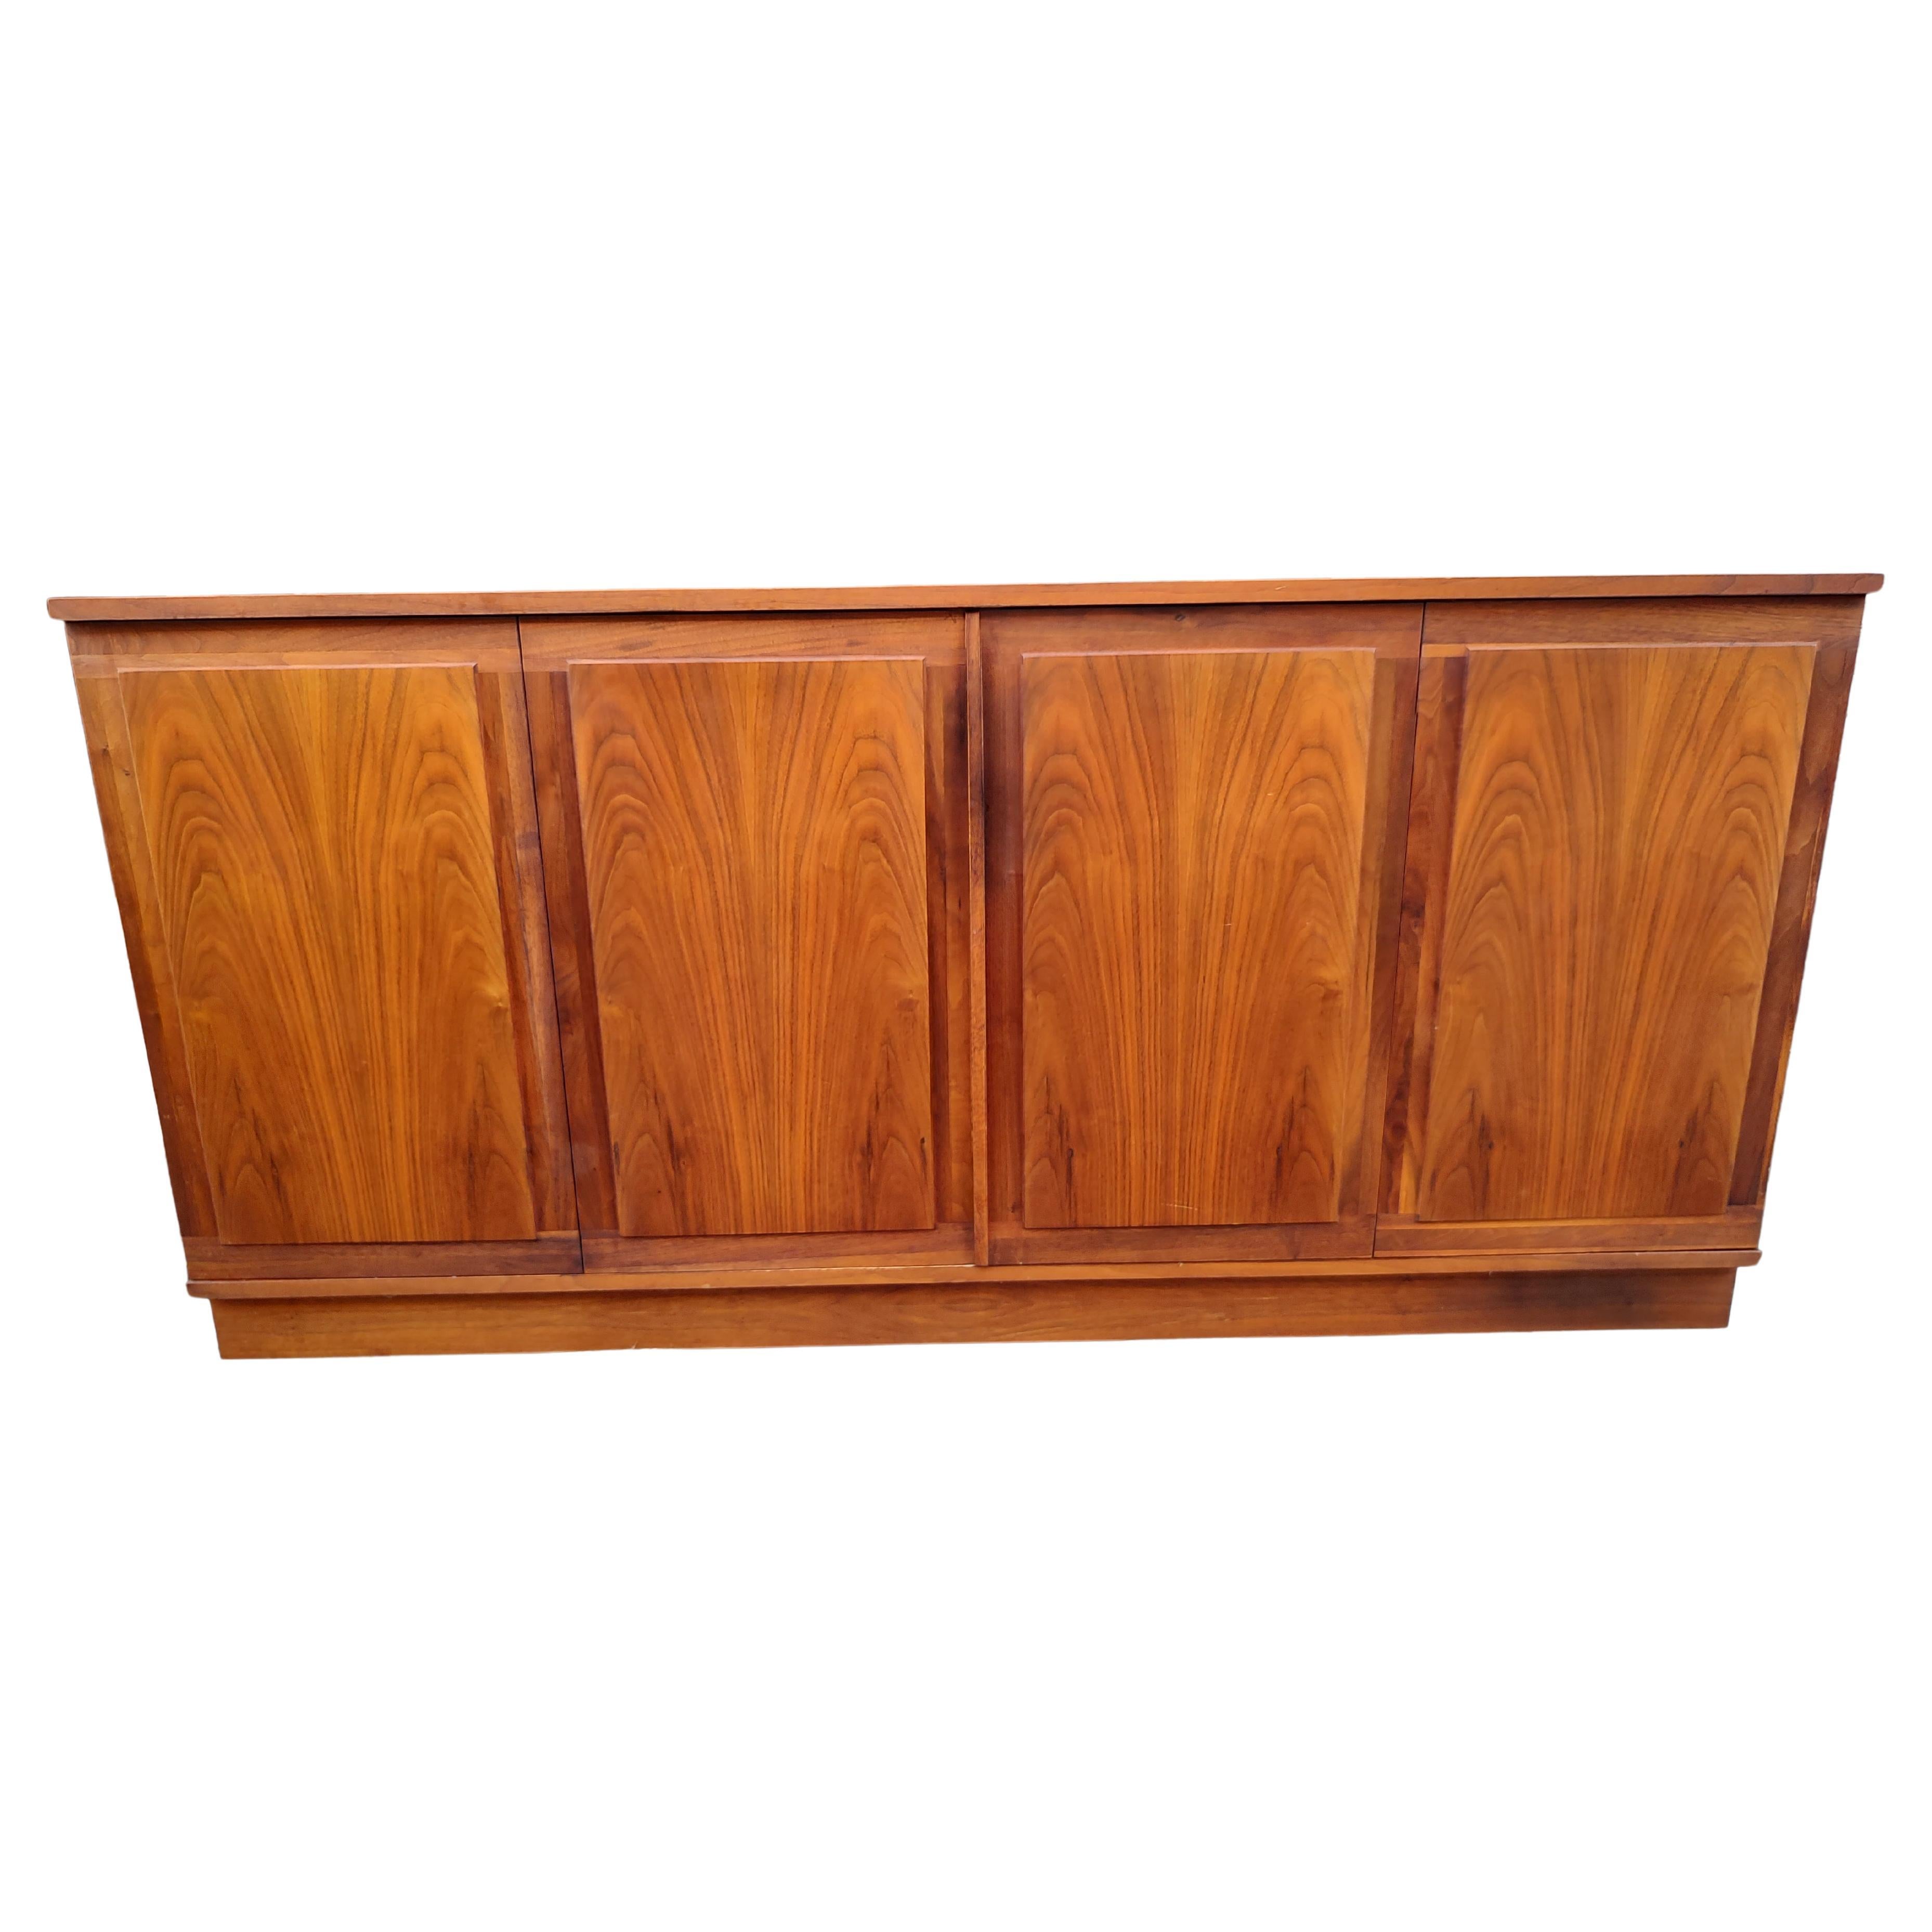 Hand-Crafted Mid-Century Modern Walnut Credenza Attributed to Founders